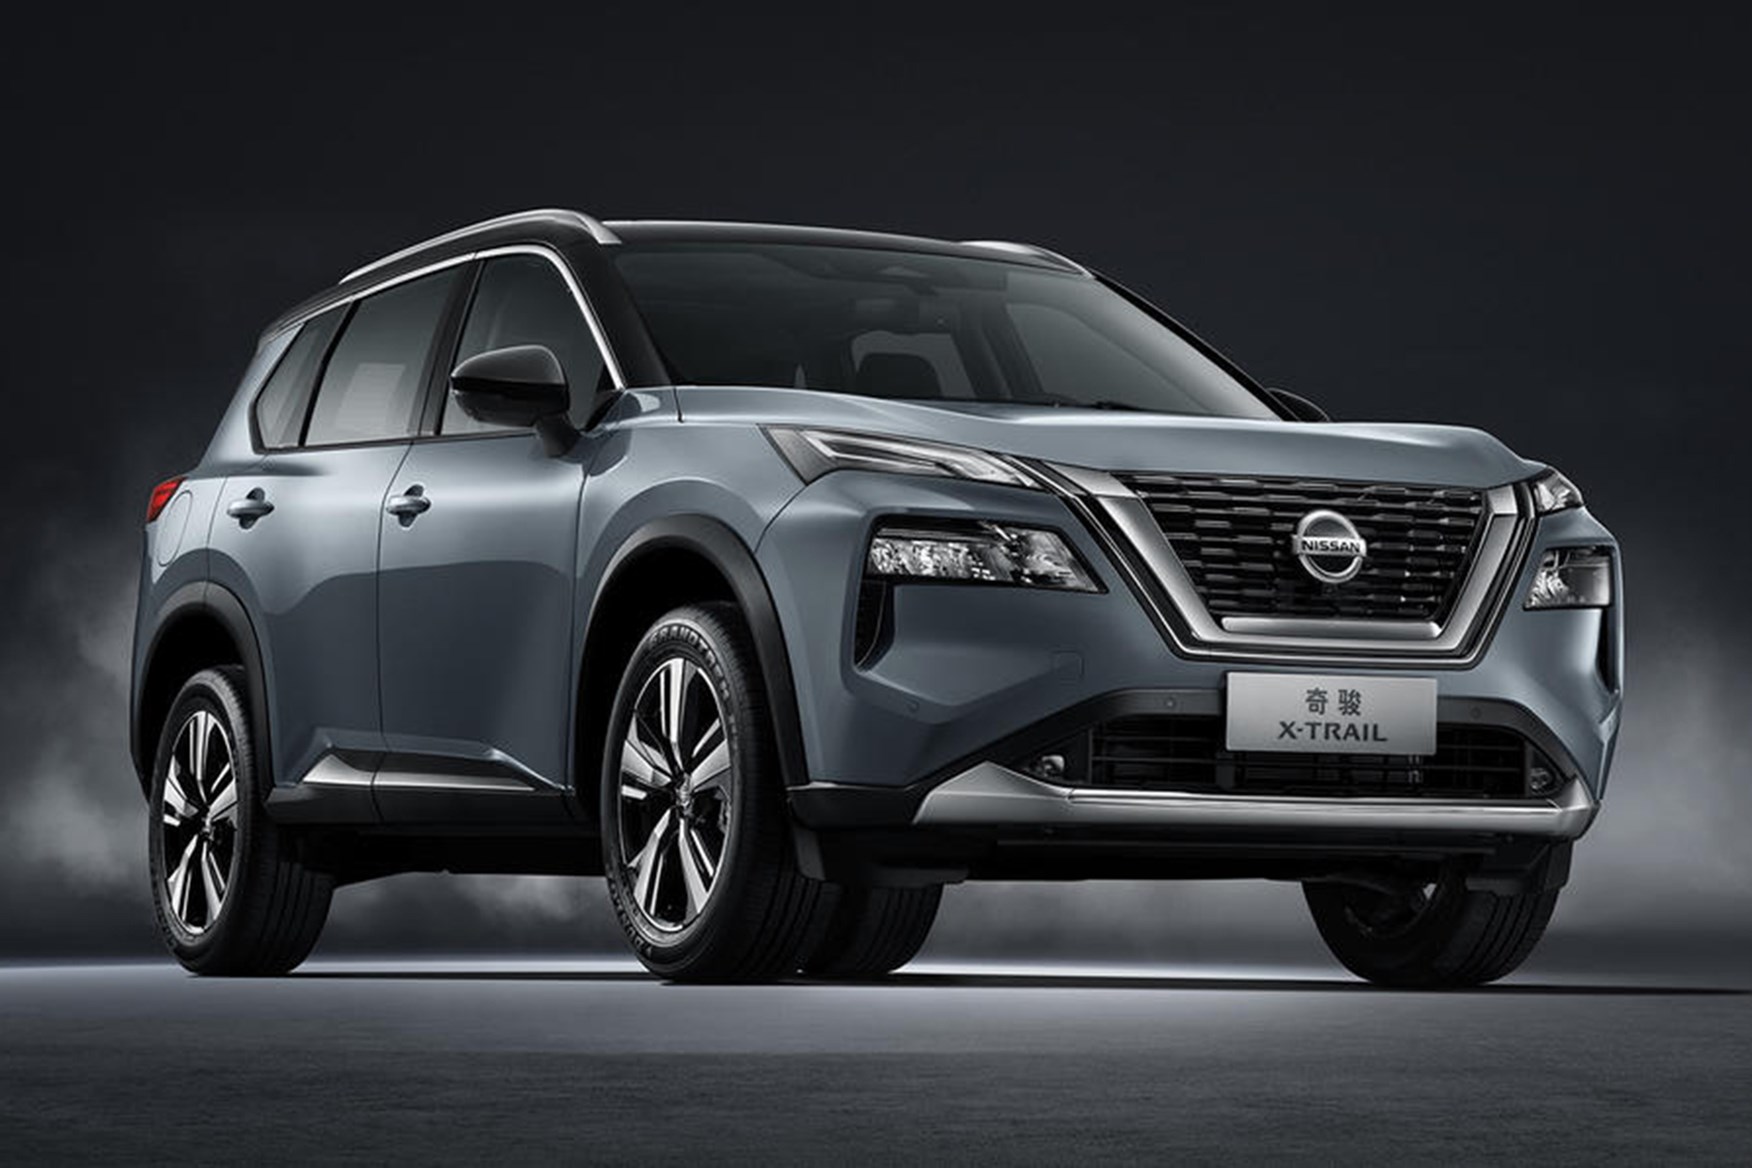 Nissan XTrail allnew large SUV coming in 2022 Parkers